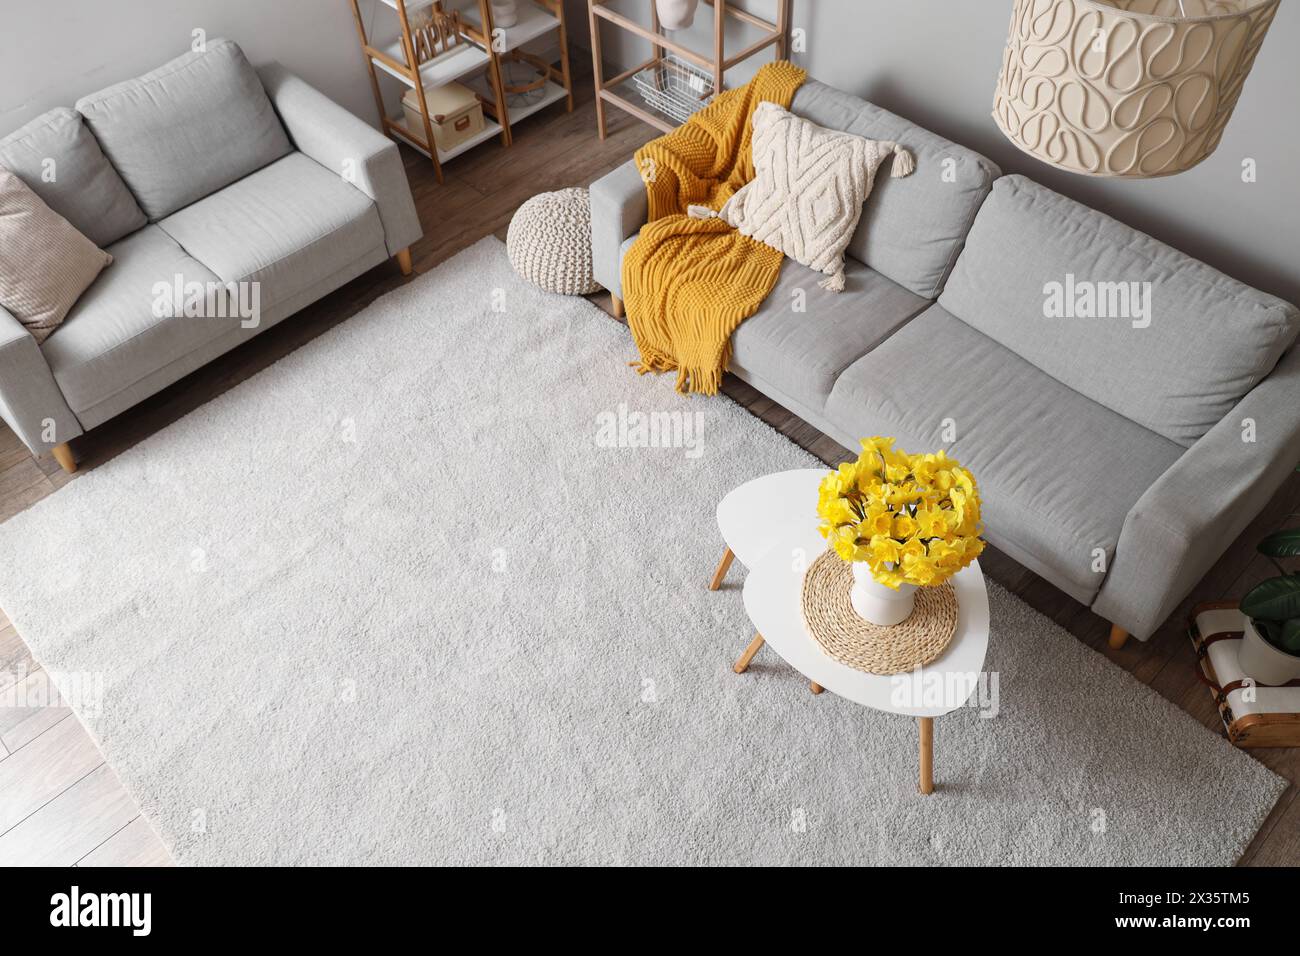 Cozy sofas and coffee table with bouquet of narcissus flowers in living room Stock Photo